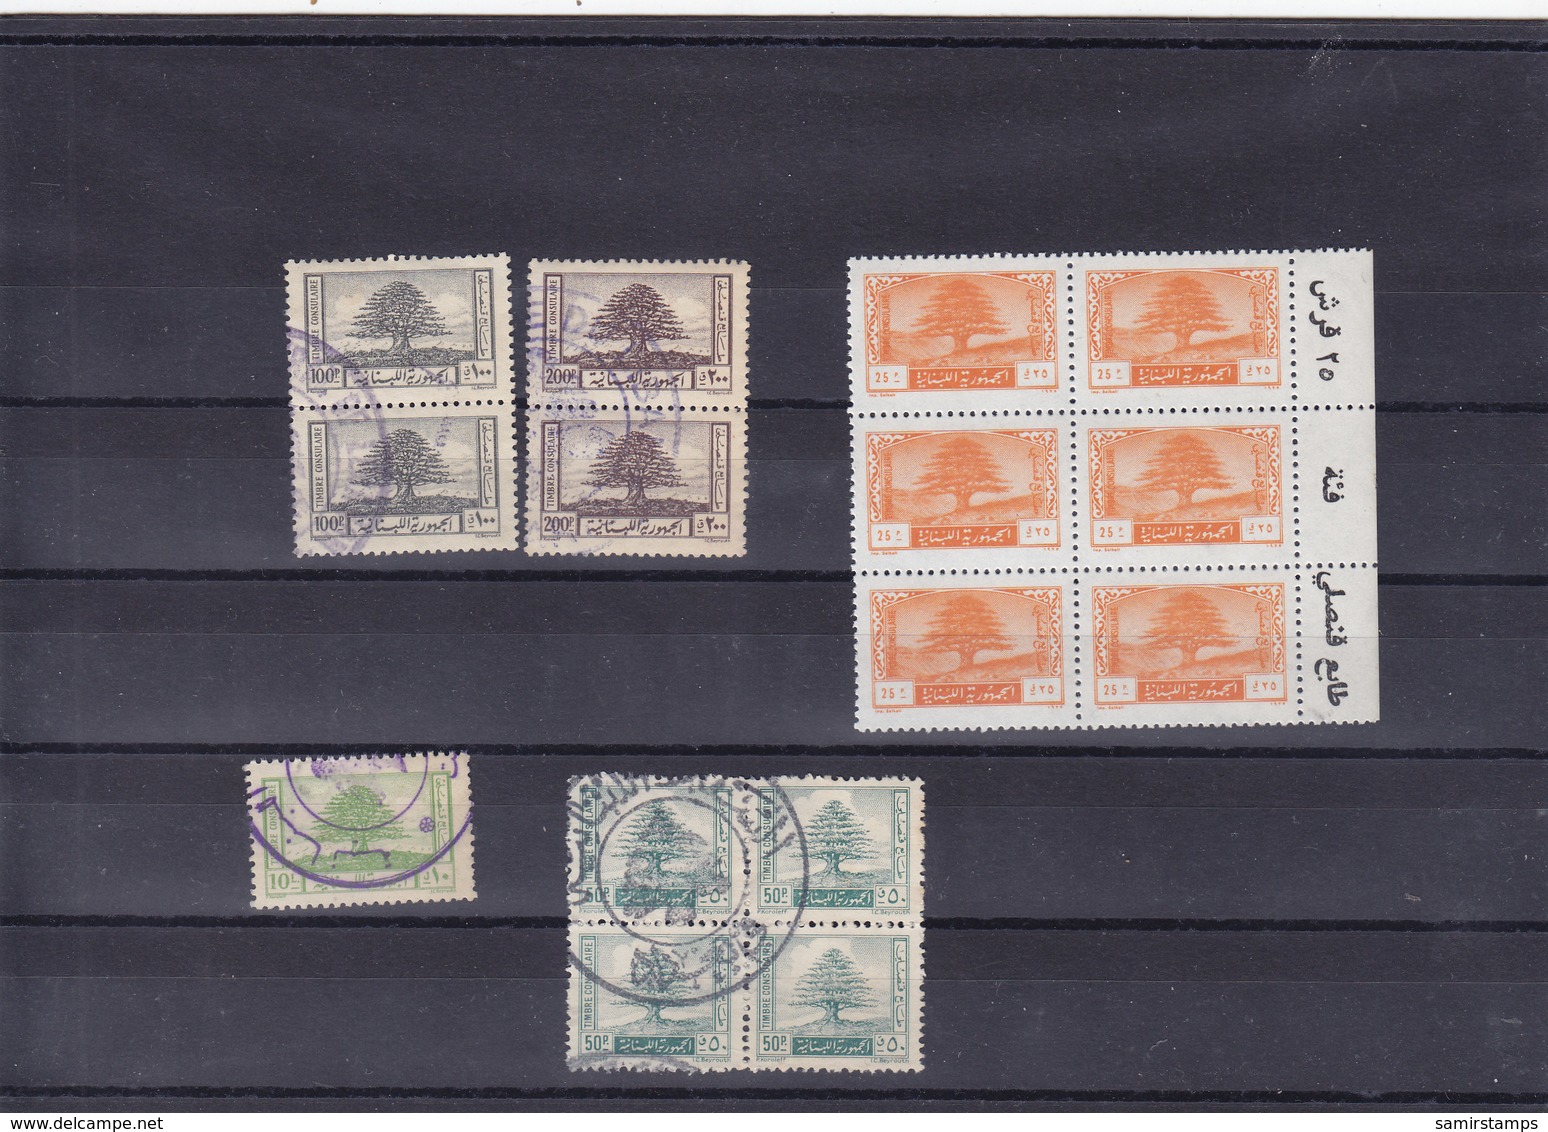 Lebanon-Liban Revenues,CONSULAIRE-Bloc's Of 6 MNH -+Bloc's Of 4 Used+2 Paires High V.+1 :10LL- RARE- SKRILL PAY ONLY - Lebanon